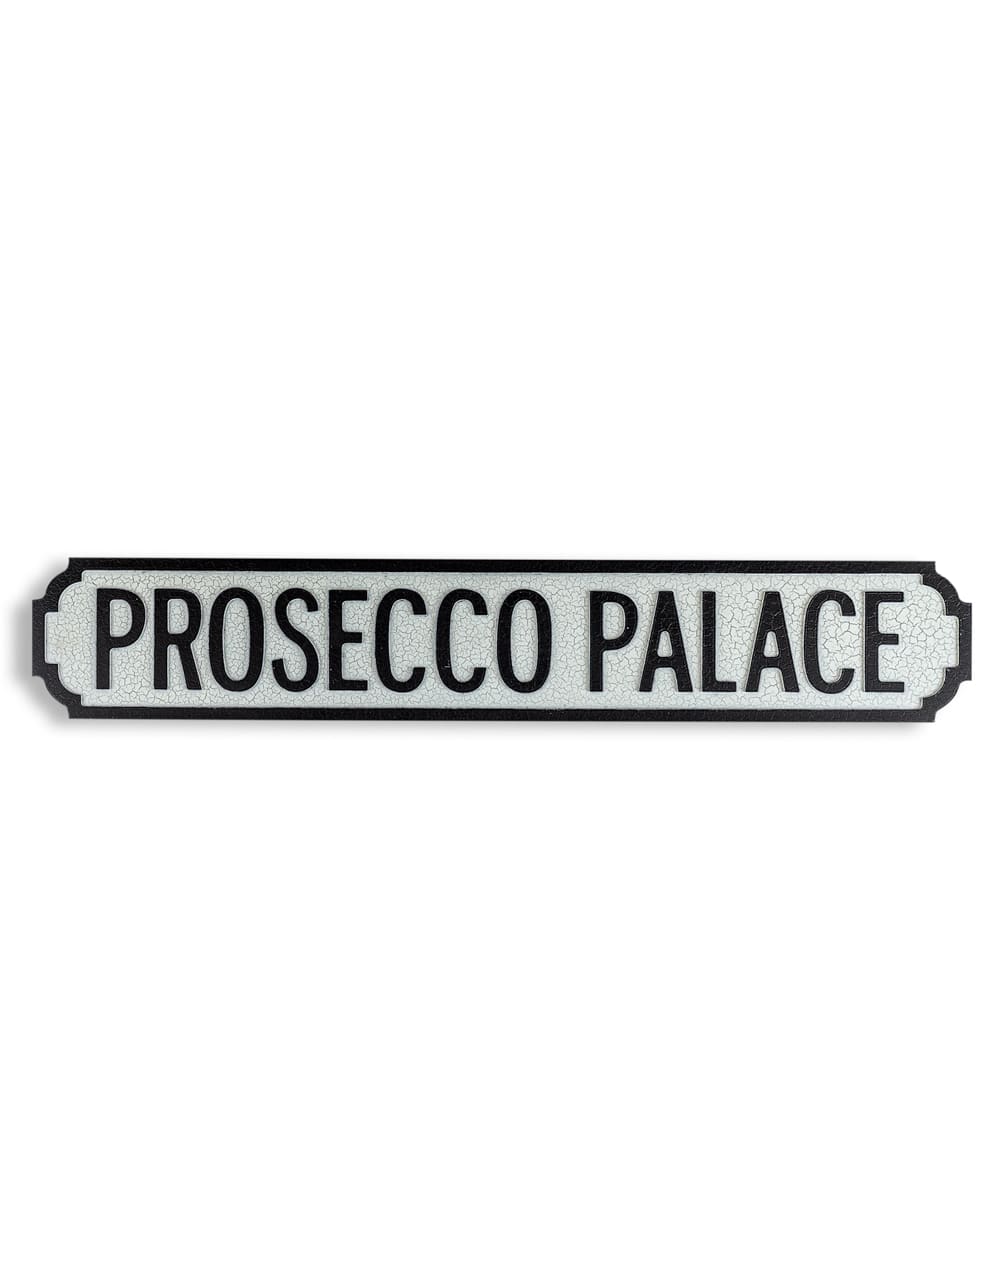 "Prosecco Palace" Road Sign